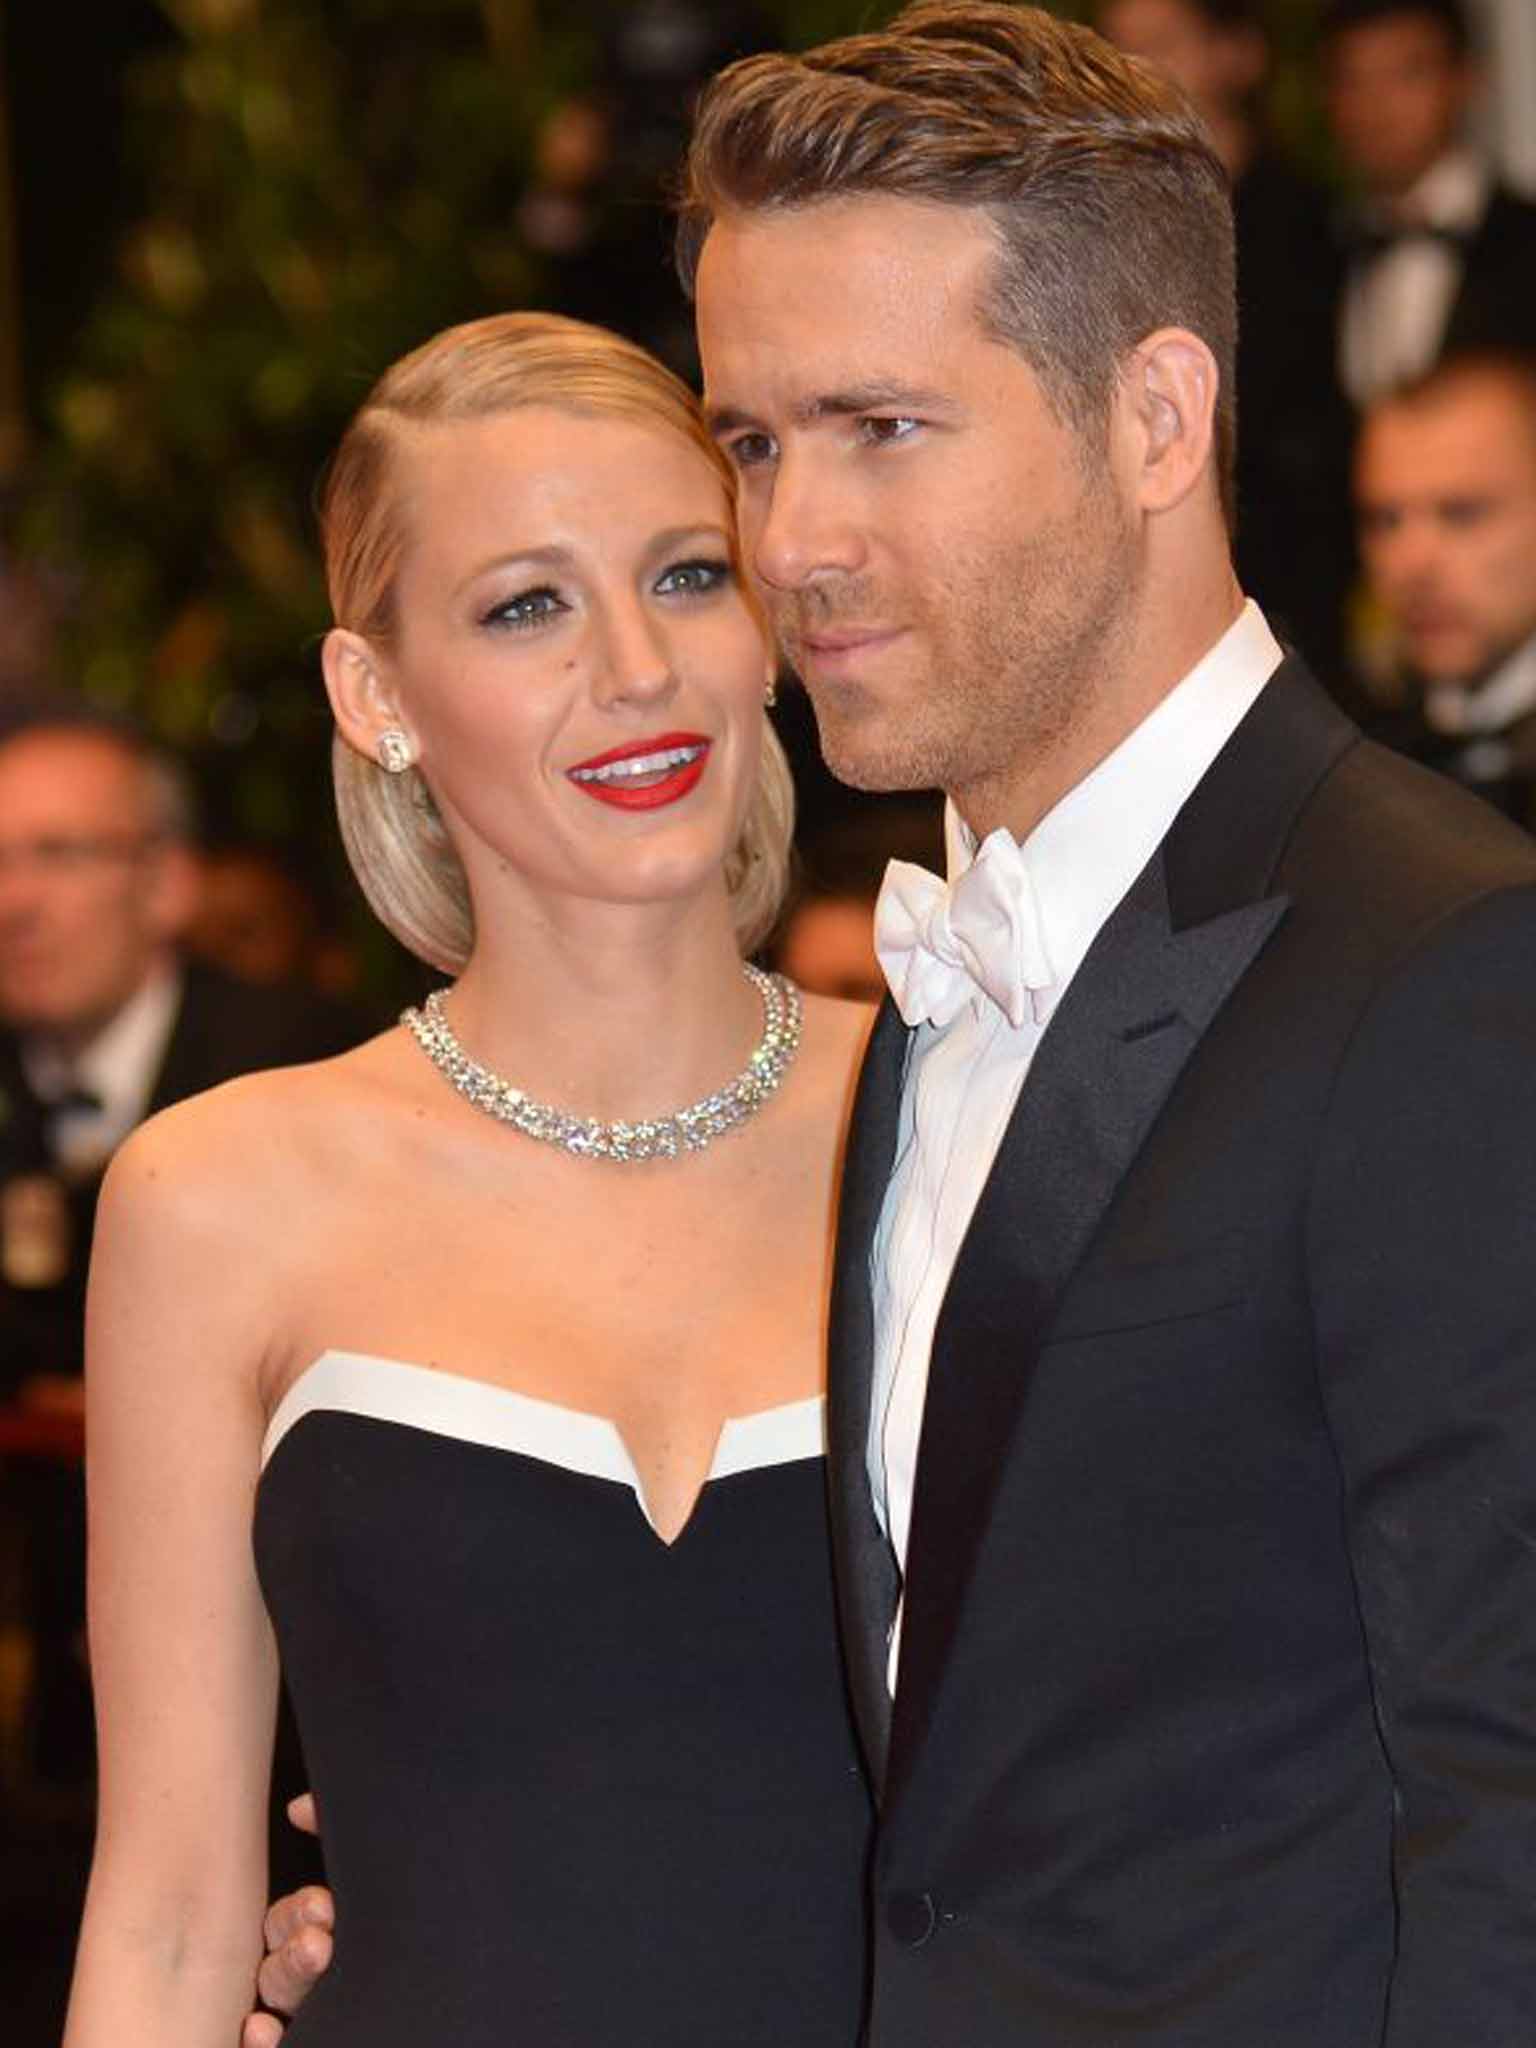 Talk of the town: Blake Lively with her husband, Ryan Reynolds